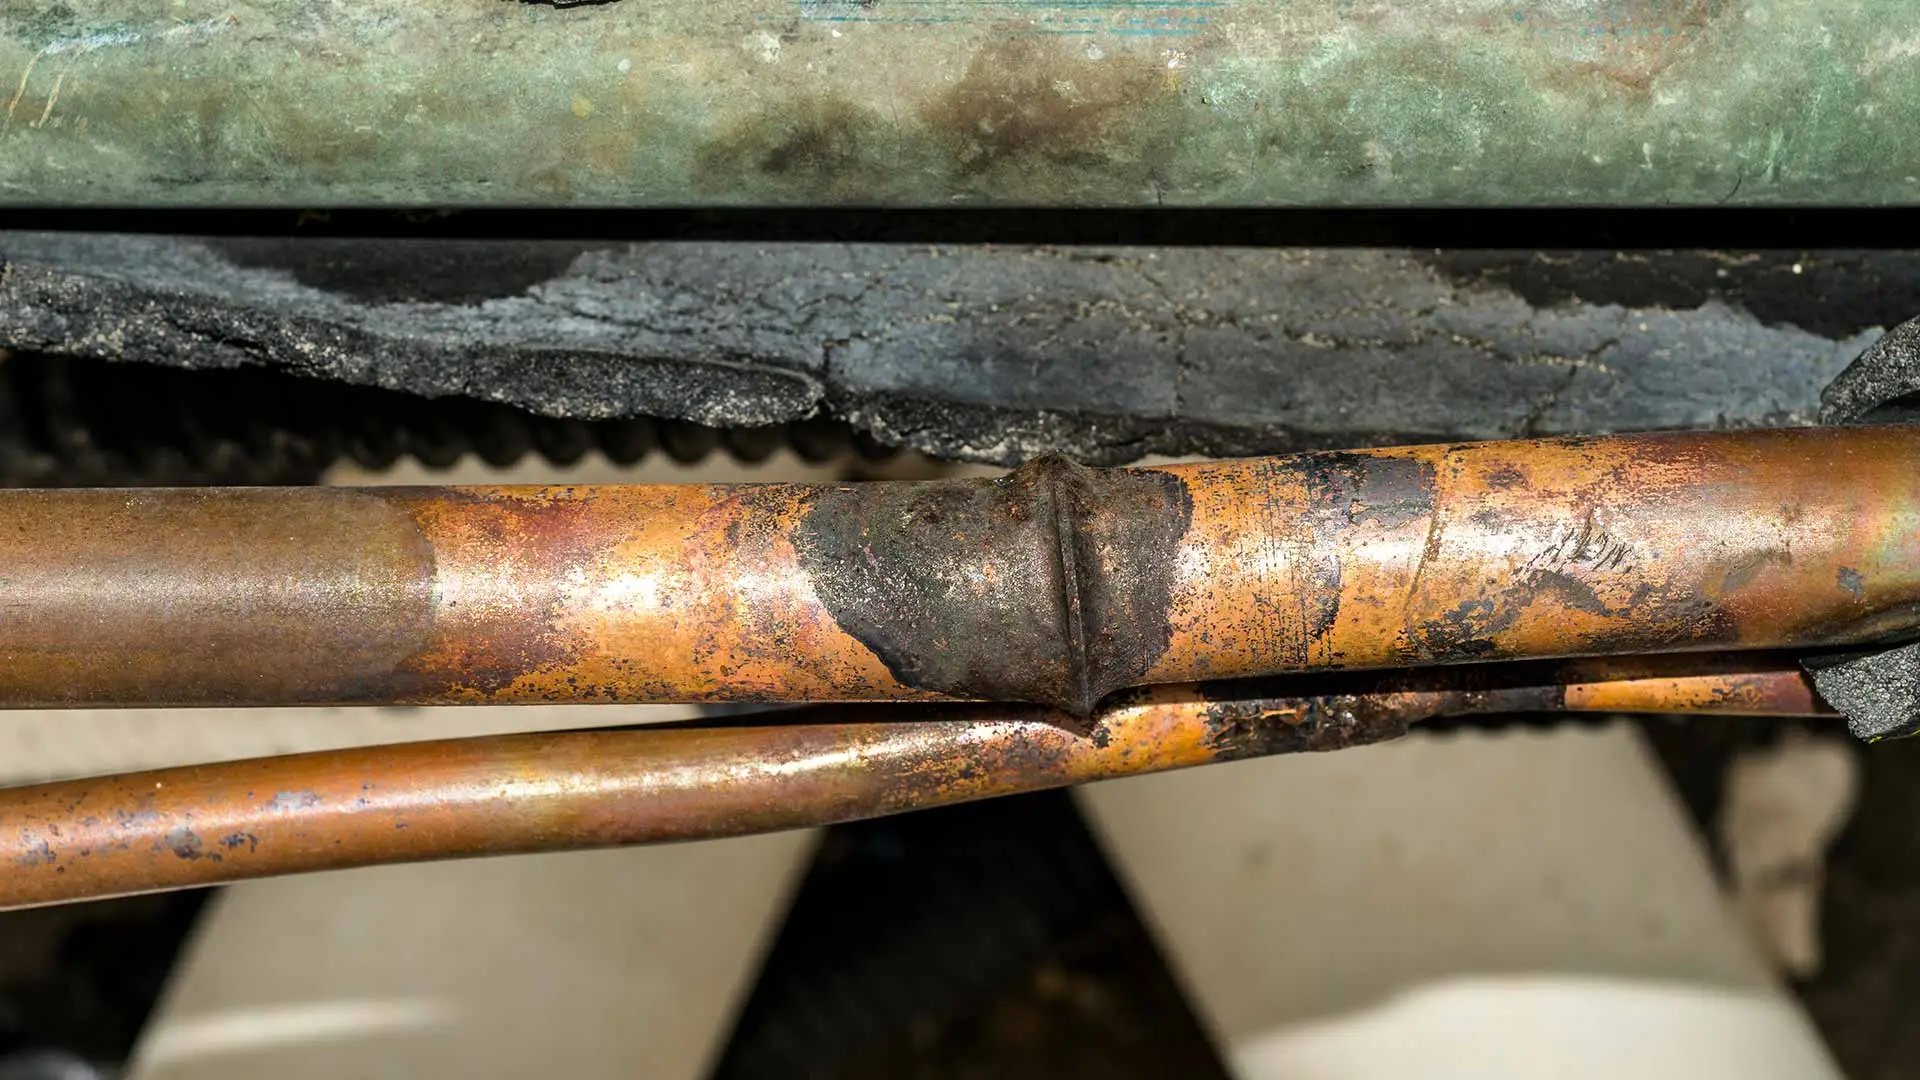 Pipes leaking from corrosion damage at a home in Wesley Chapel, FL.